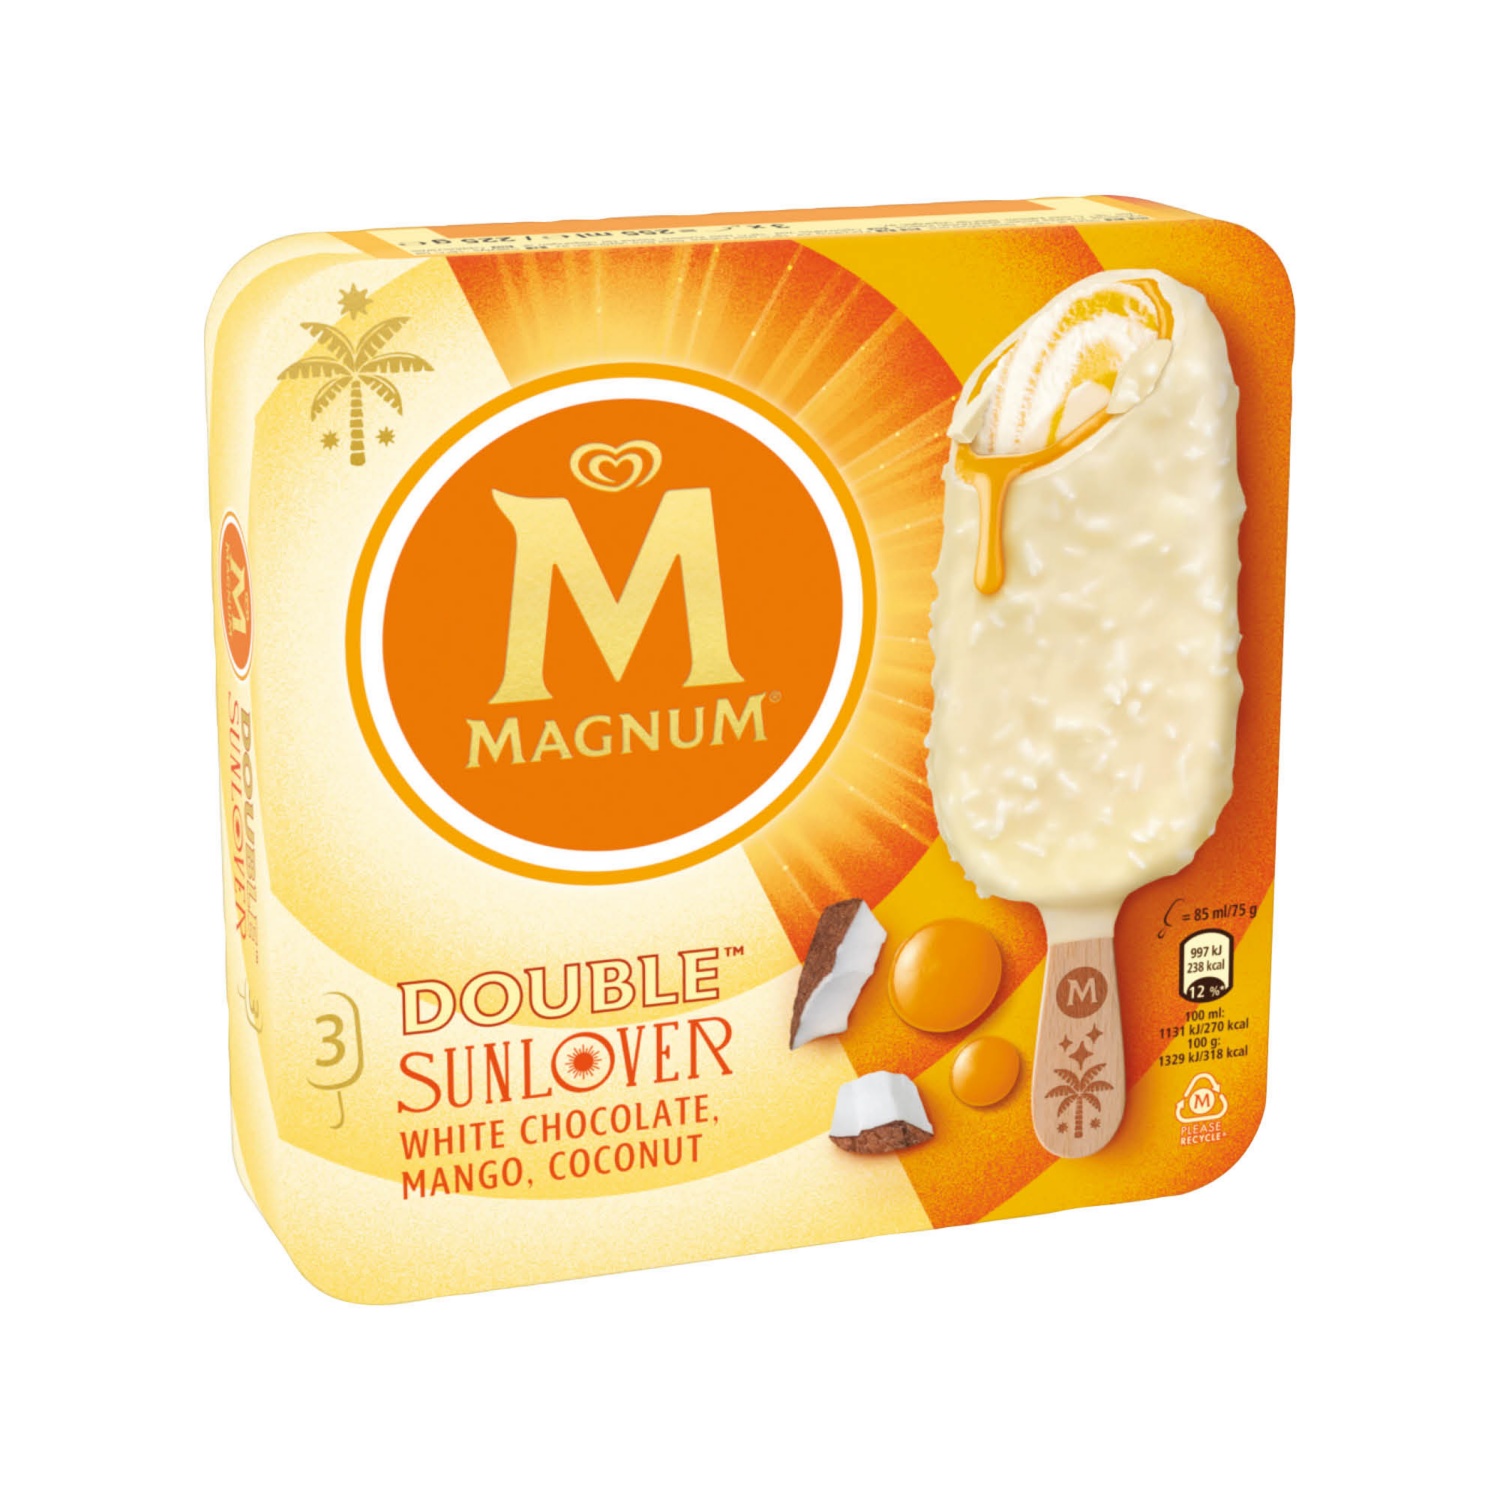 MAGNUM Double Sunlover